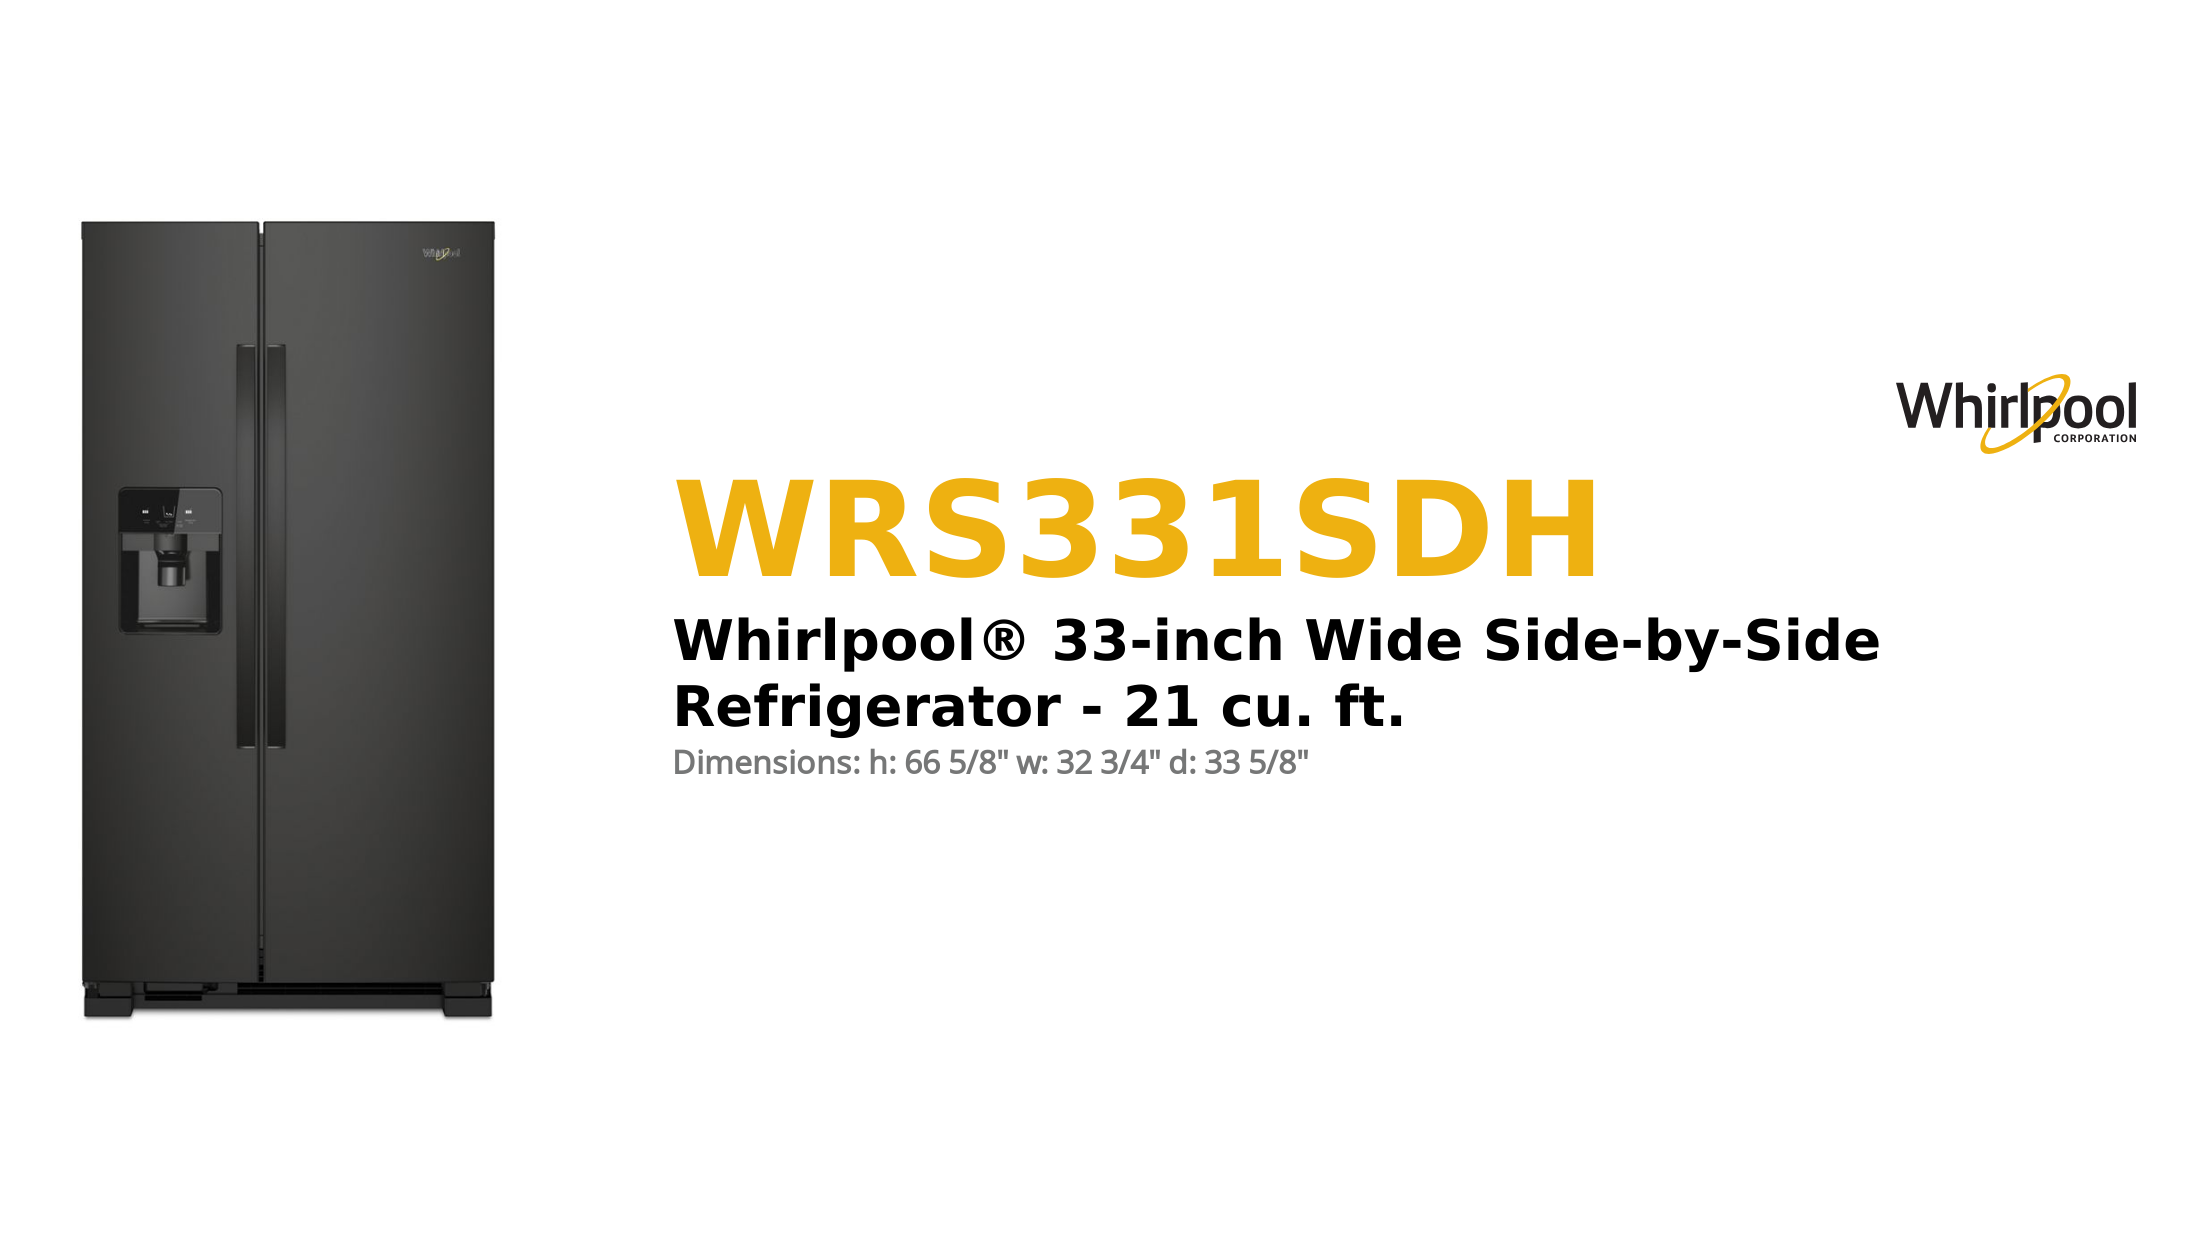 WRS331SDH Product Brief